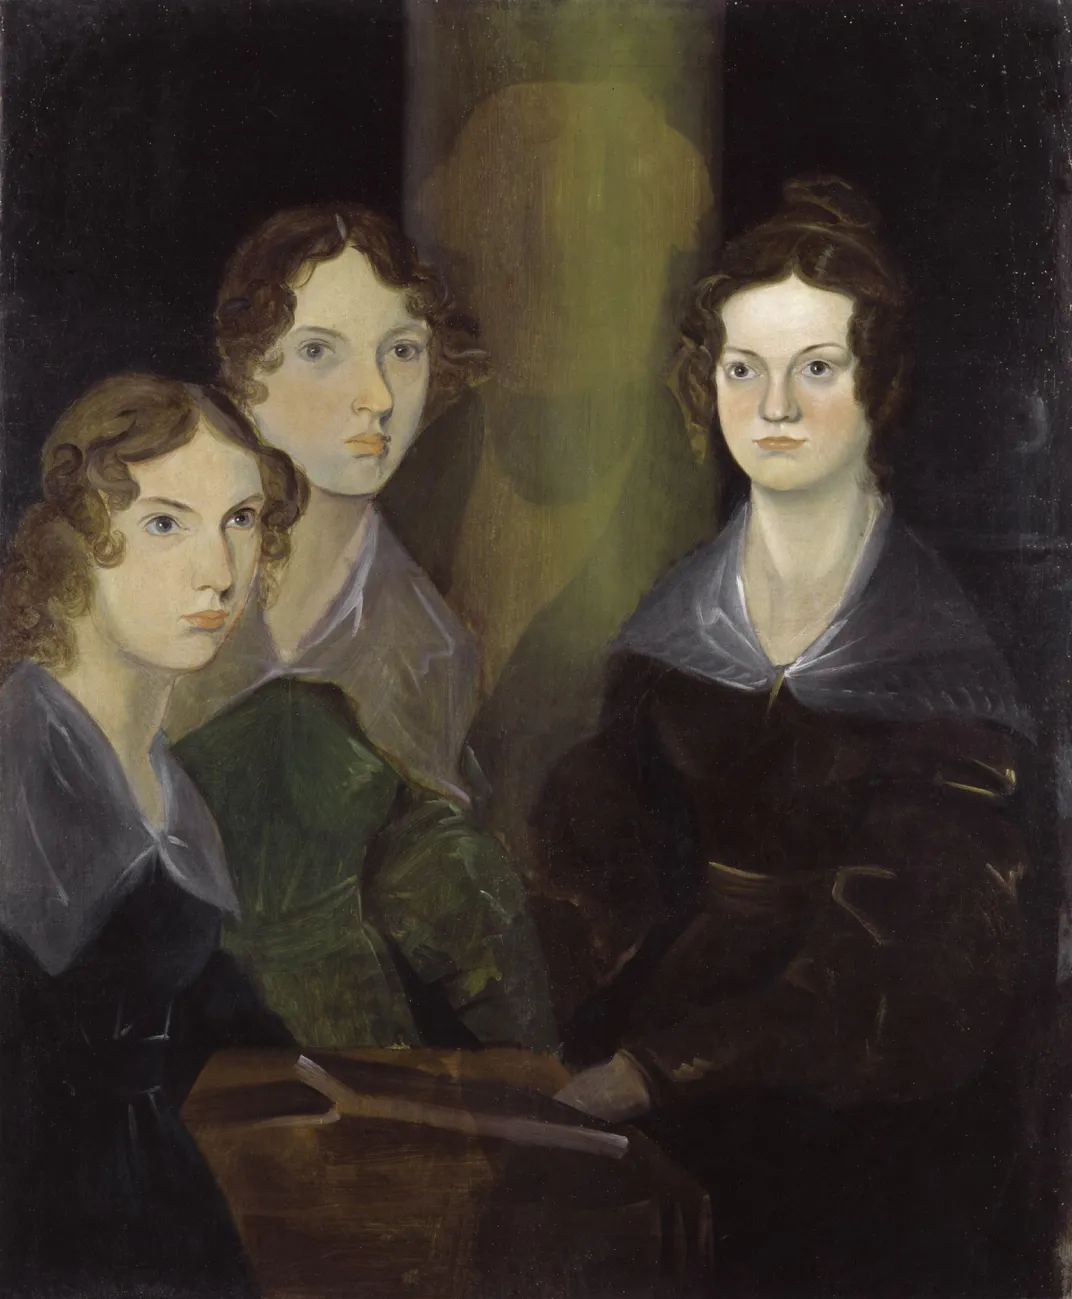 A painting of the Brontë sisters by their brother, Branwell